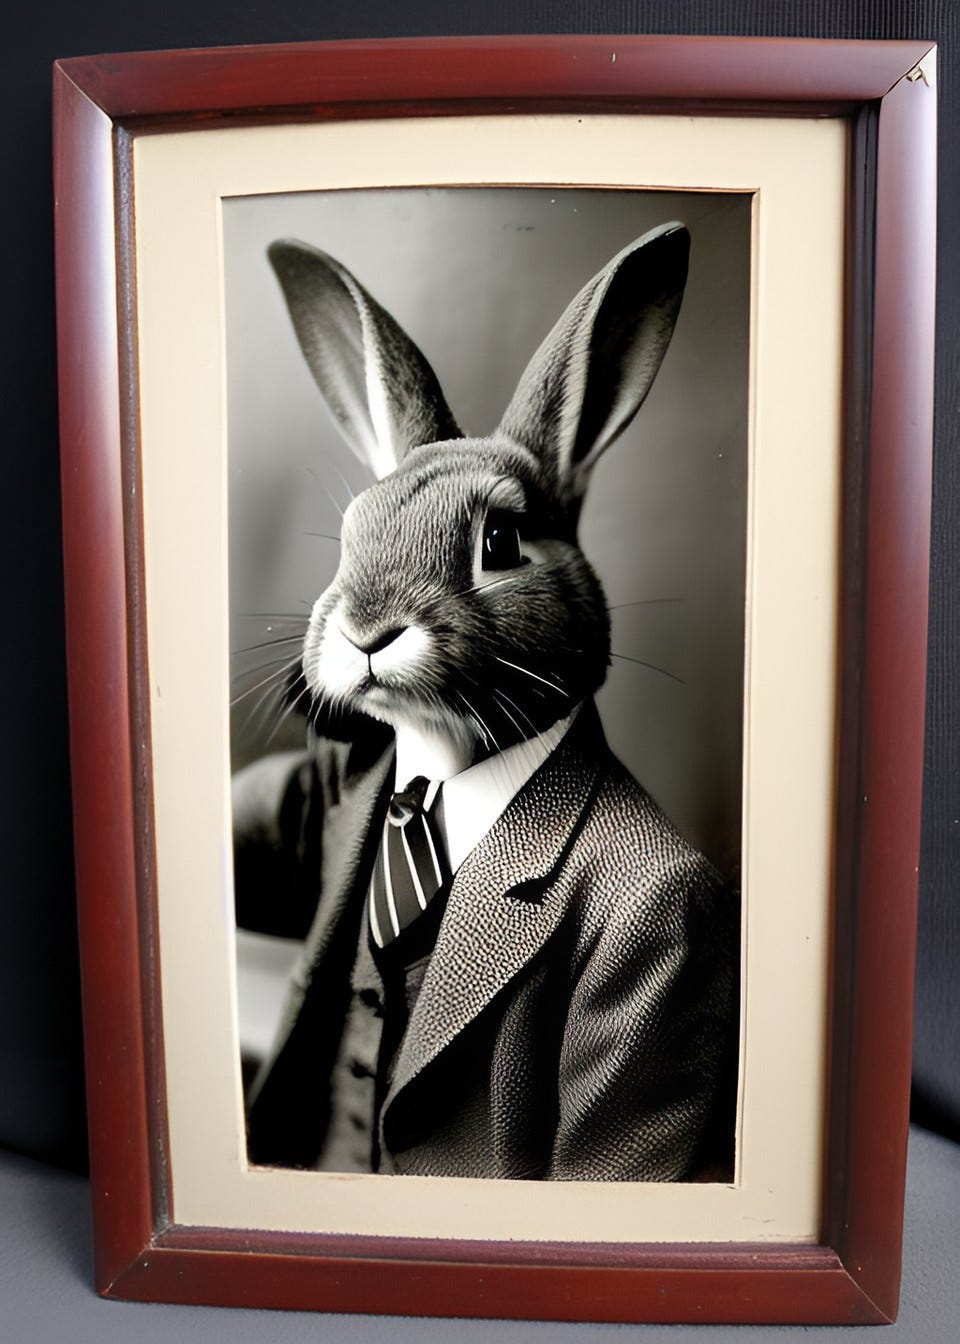 Framed photo of a rabbit in a suit